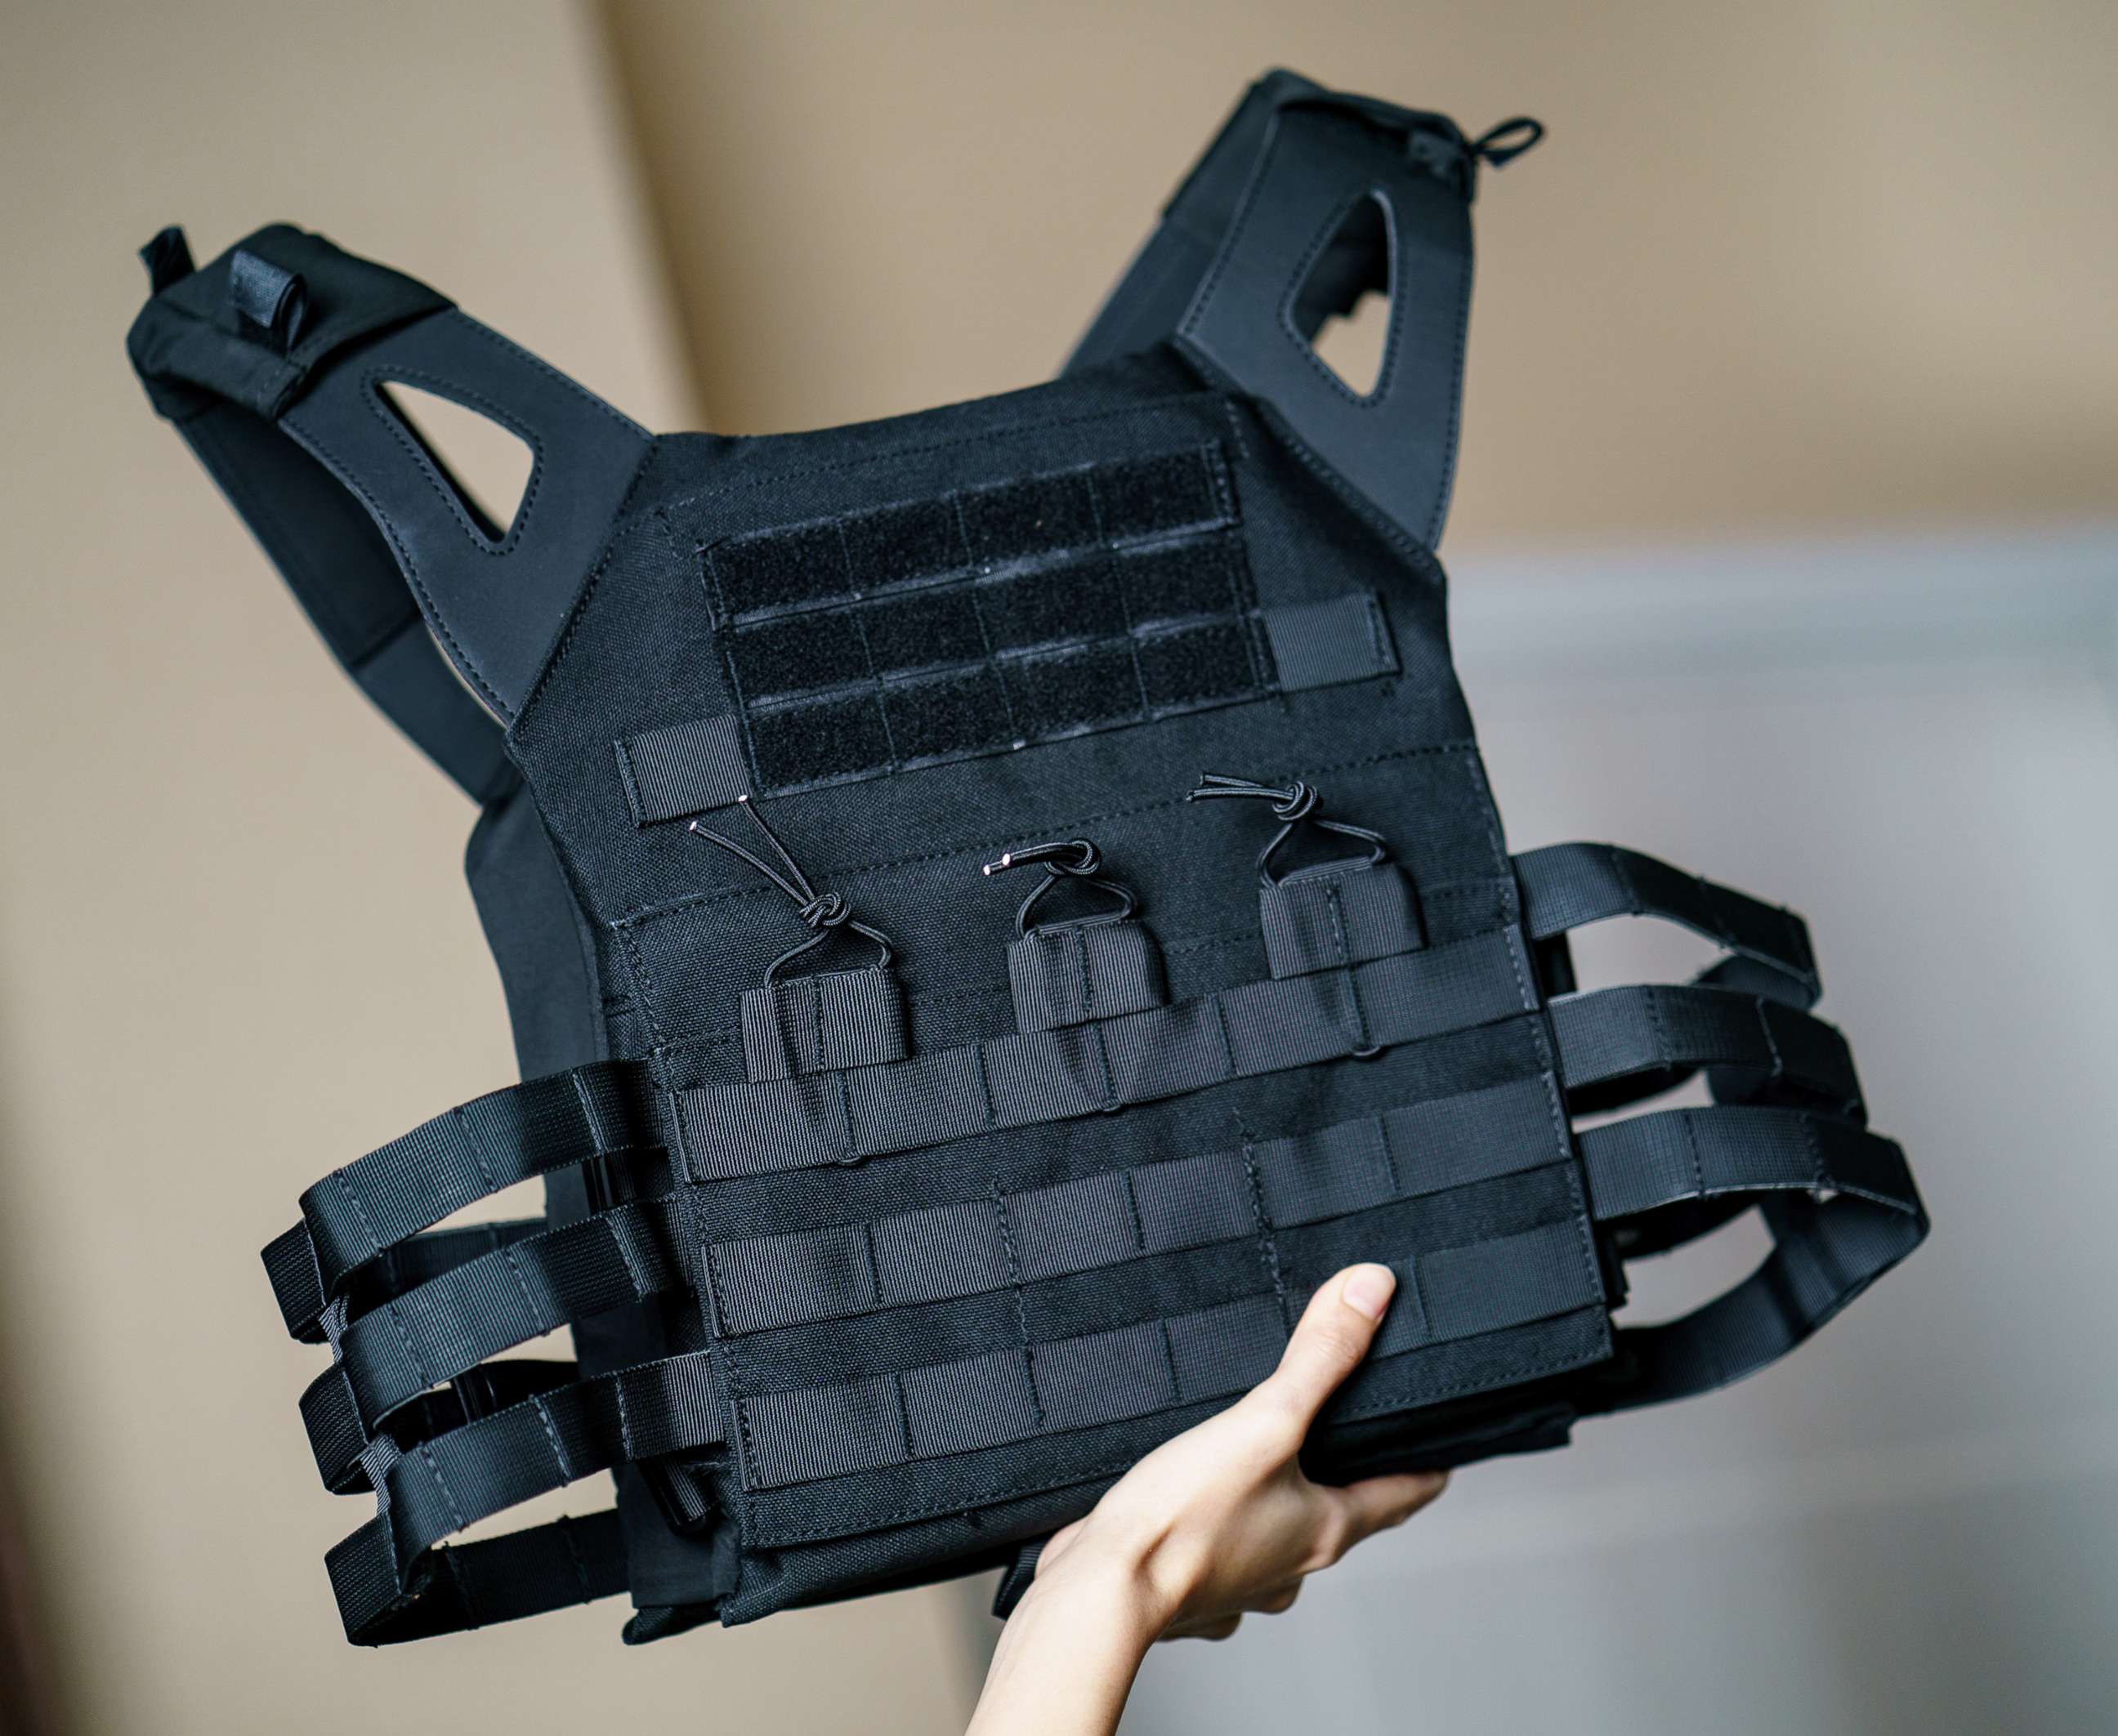 PHOTO: A bulletproof vest for protection is displayed in an undated stock image.